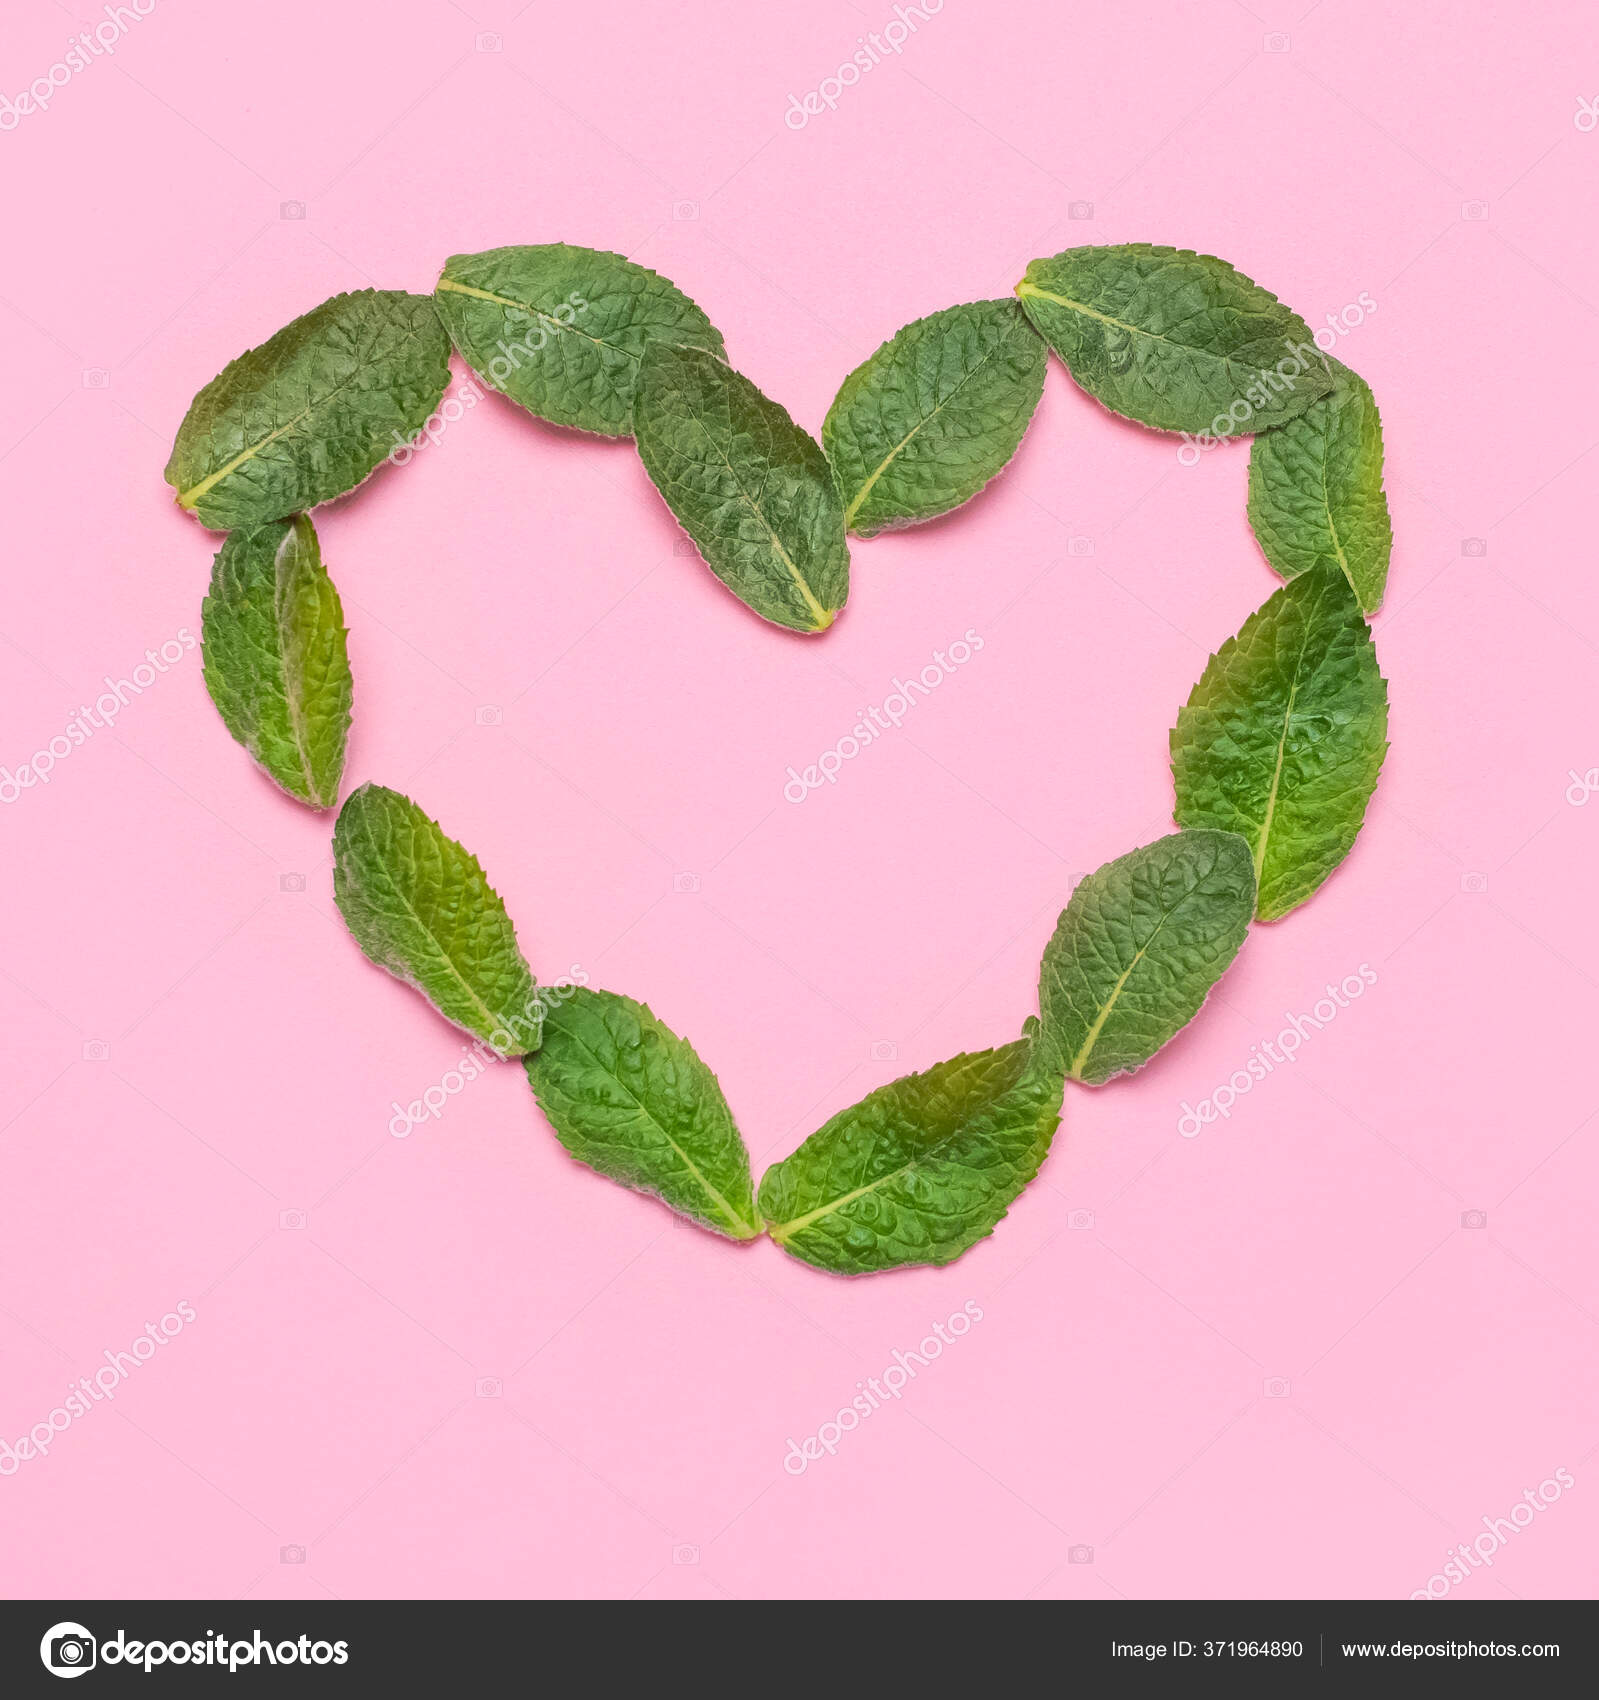 Fresh green leaves of mint, lemon balm, peppermint in the shape of heart on  pink background